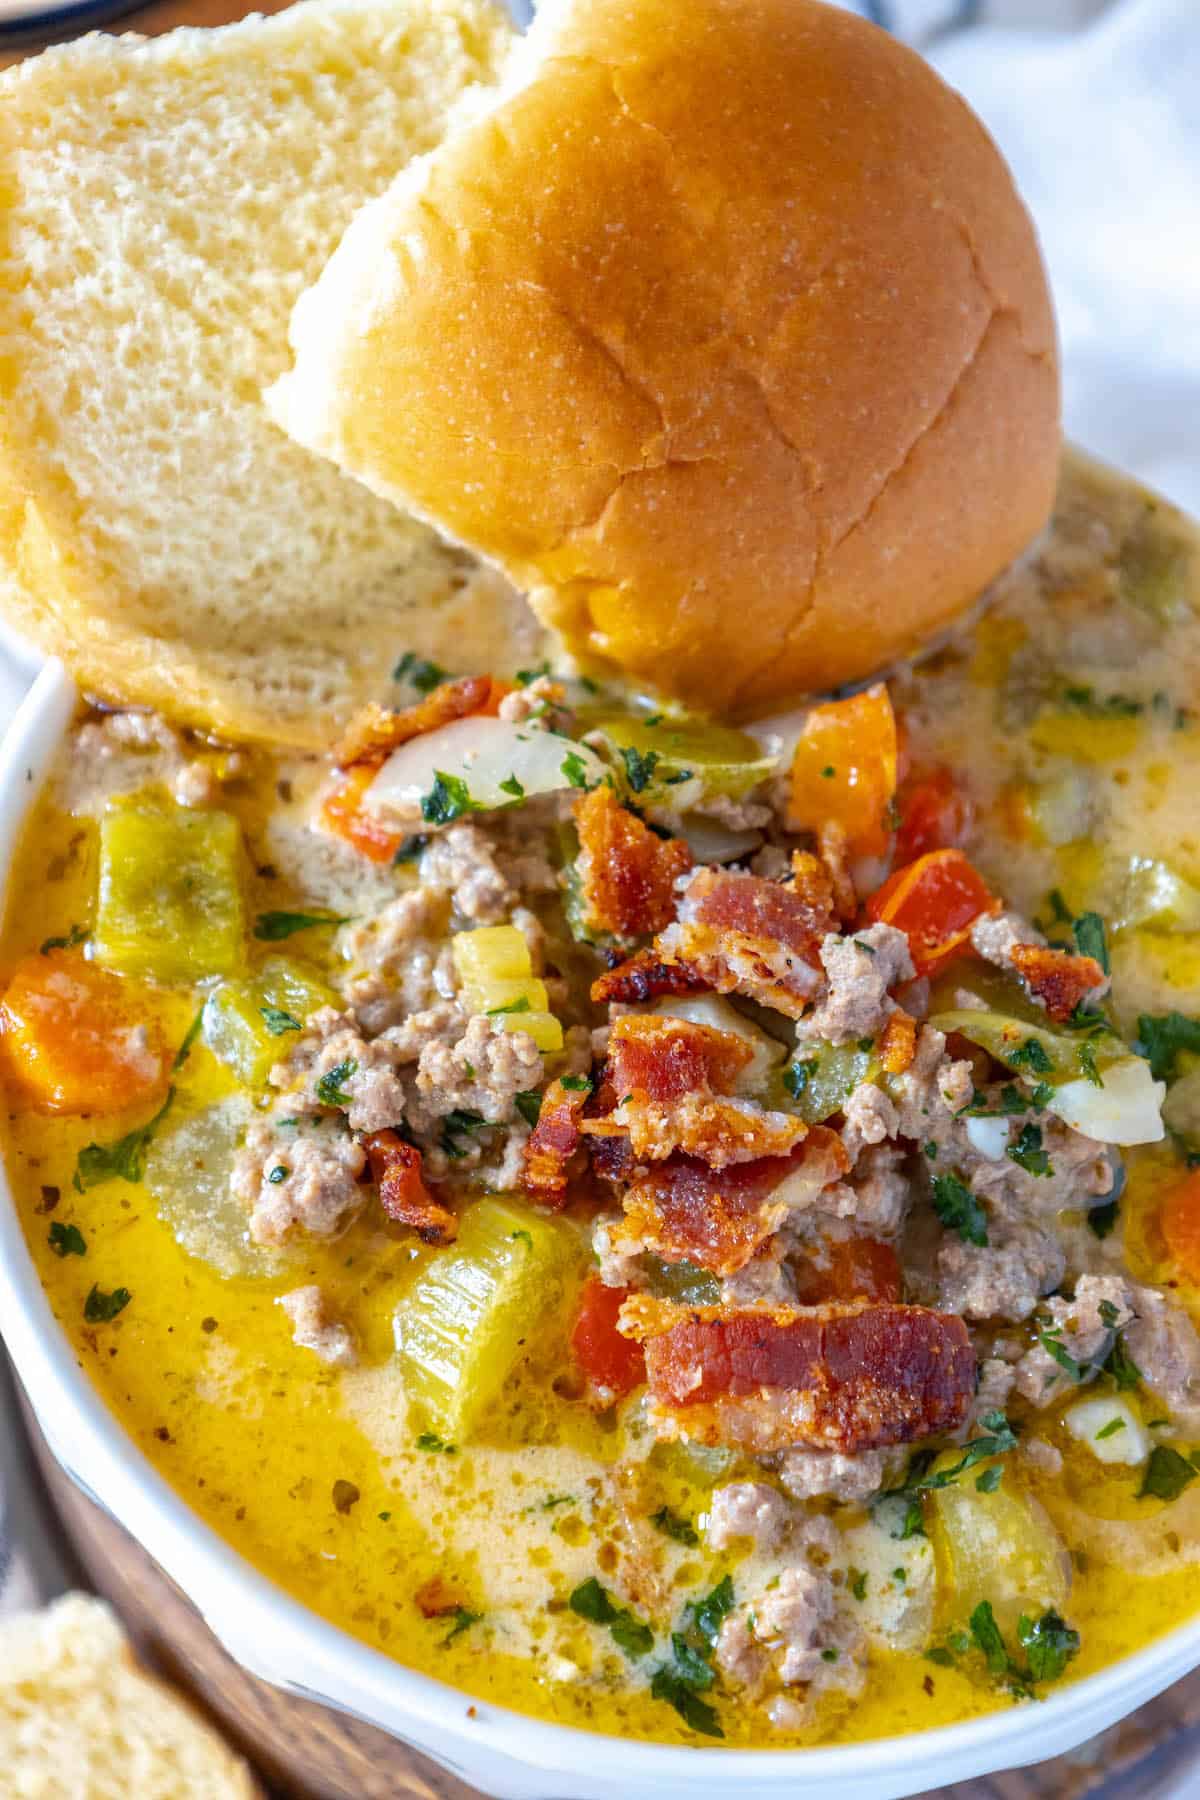 A cheesy bowl of Cheeseburger Soup with meat, vegetables, and bread.